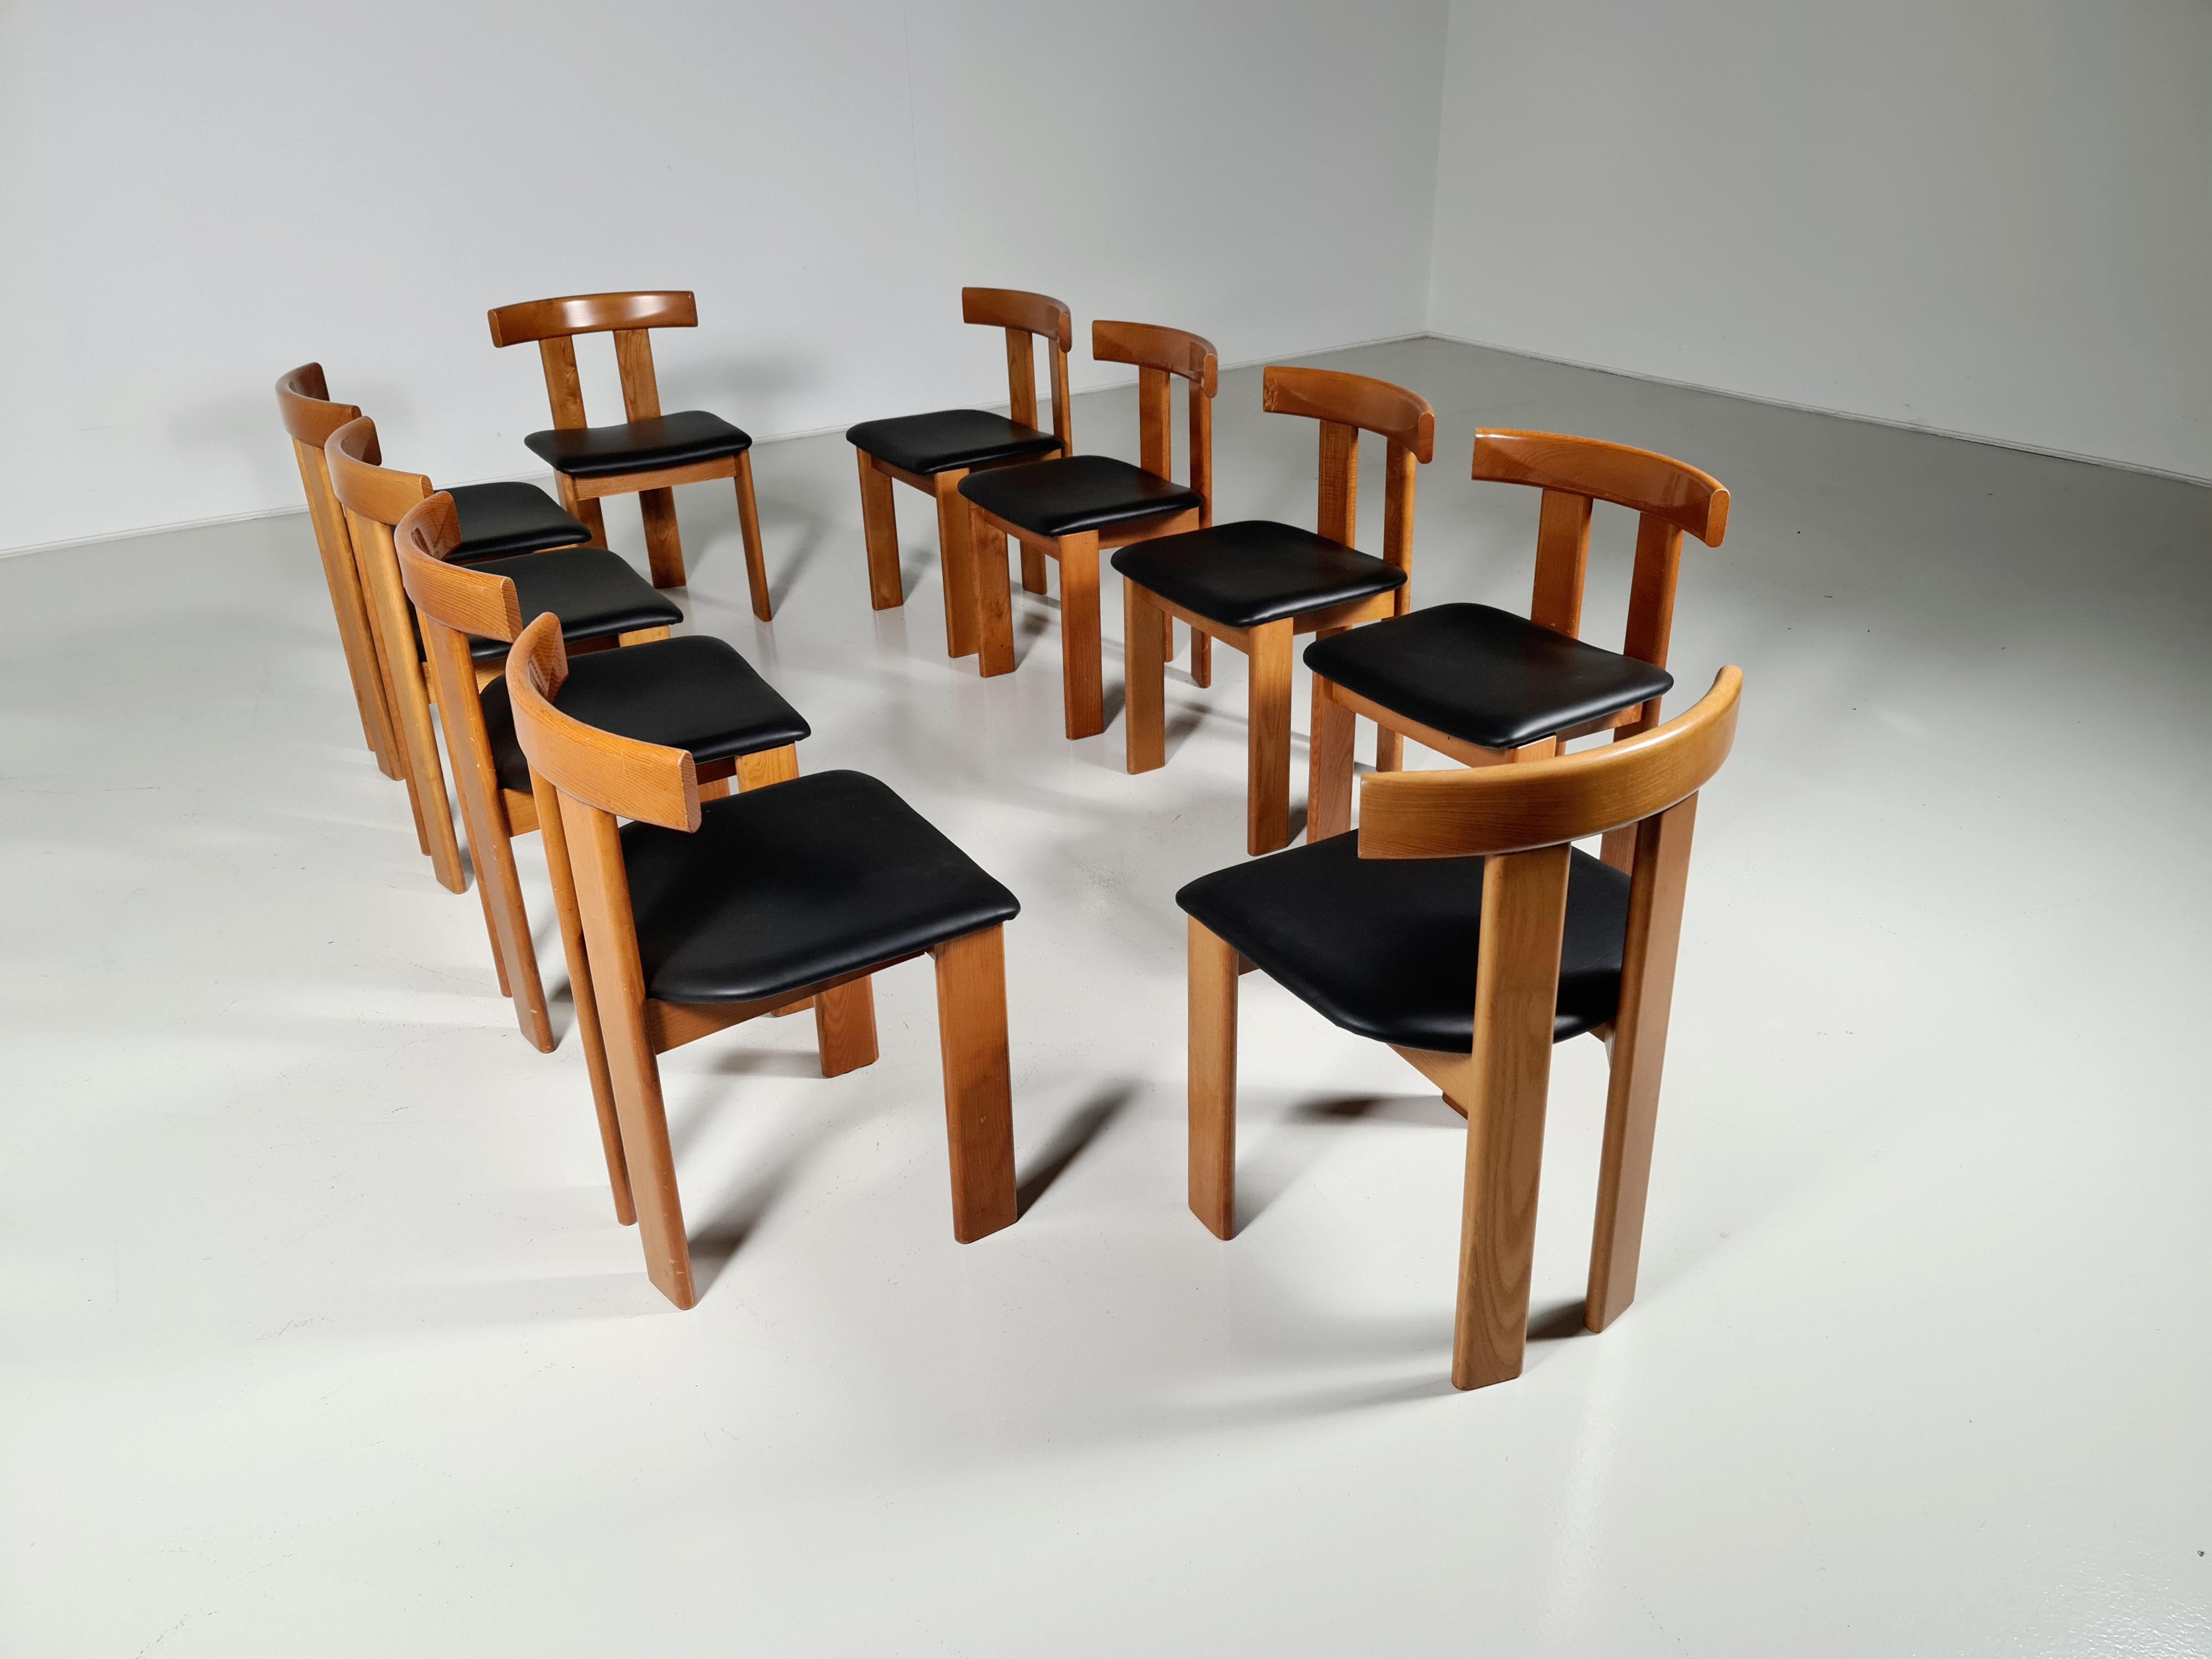 Set of 10 dining chairs by Luigi Vaghi for Former, 1960s. Blond birch wood with reupholstered black leather seats.